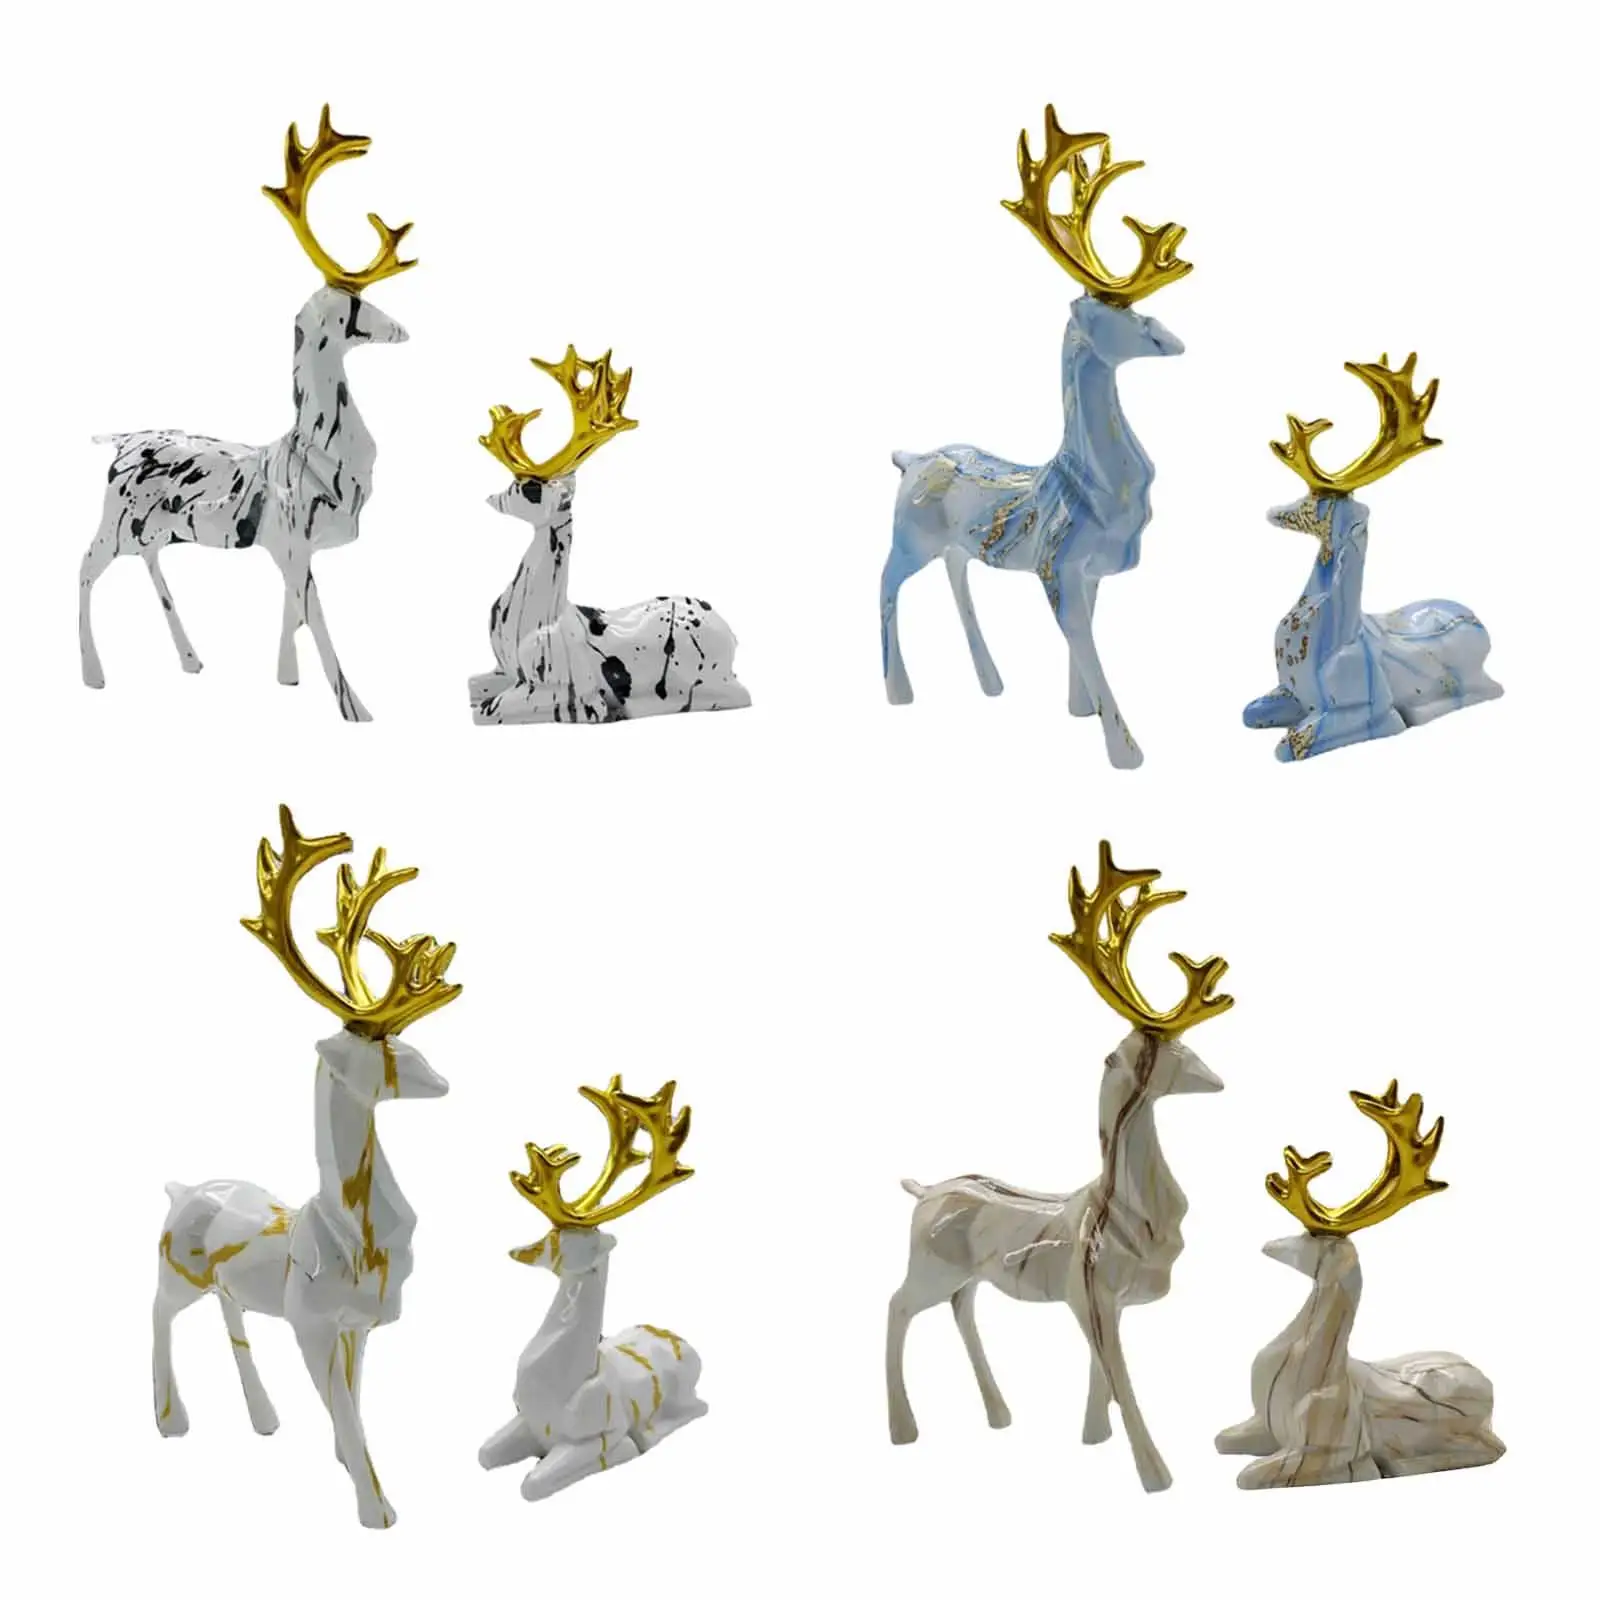 

2x Deer Figurines Animal Sculpture Resin Collectible Tabletop Ornament Elk Statue for Bedroom Shelf Souvenirs Gift Home Decor